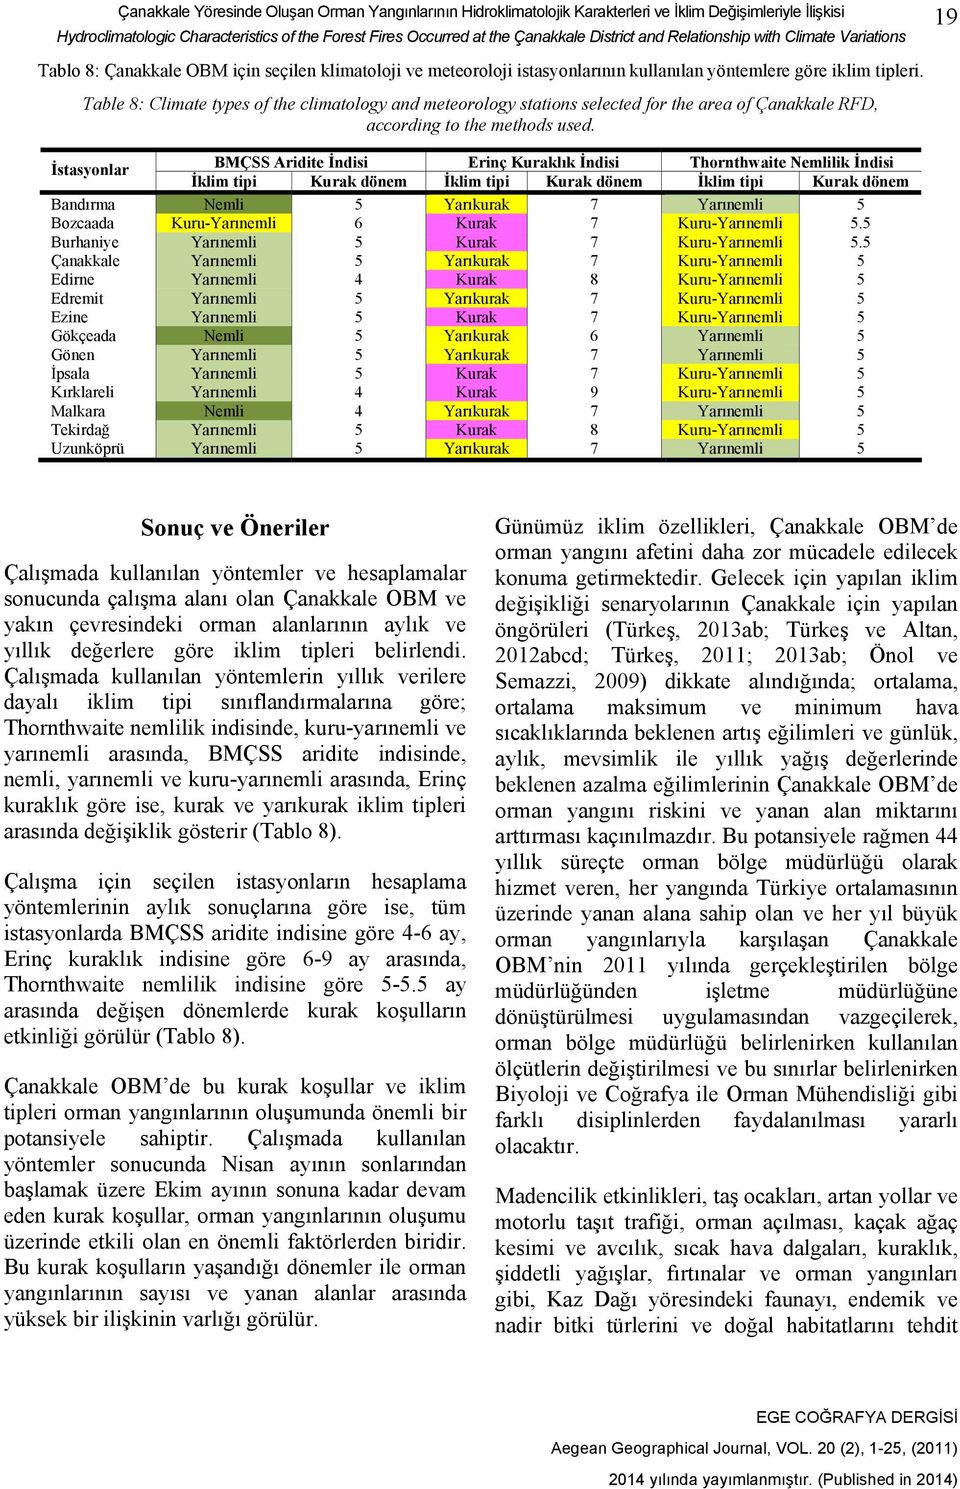 Table 8: Climate types of the climatology and meteorology stations selected for the area of Çanakkale RFD, according to the methods used.